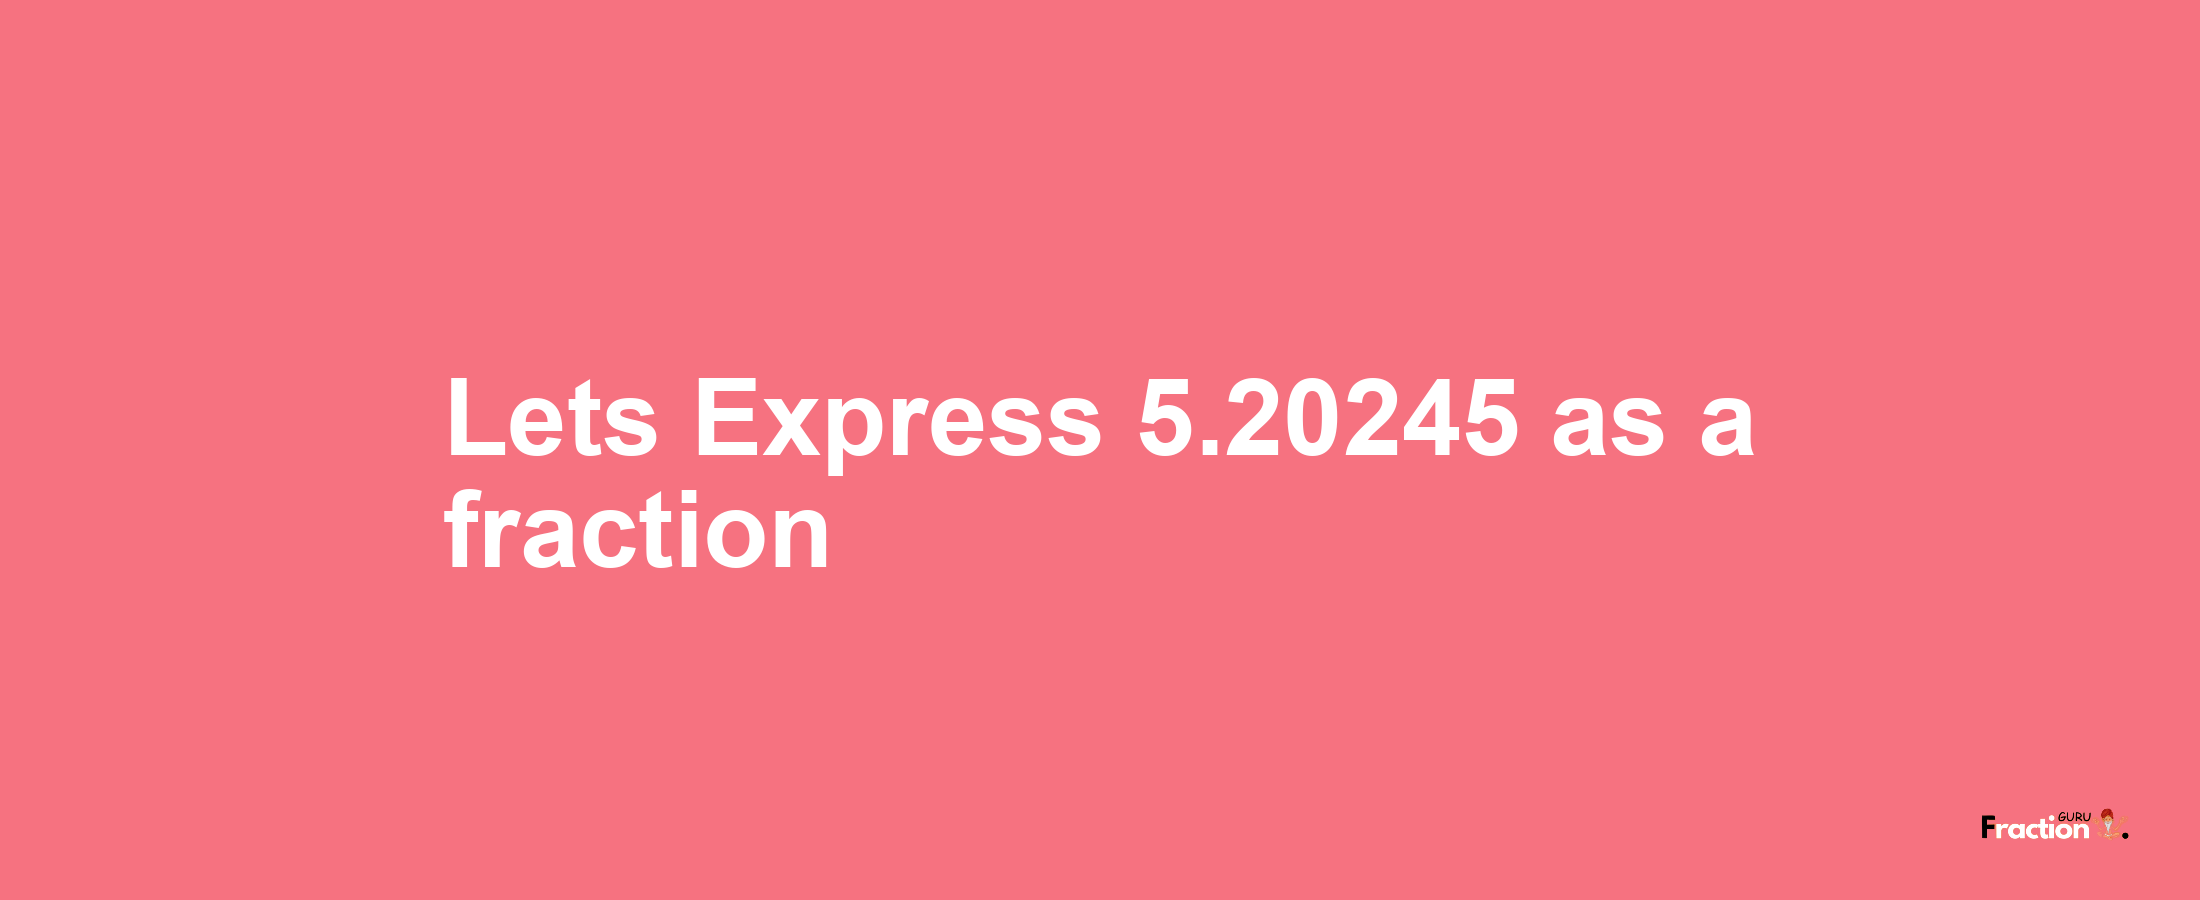 Lets Express 5.20245 as afraction